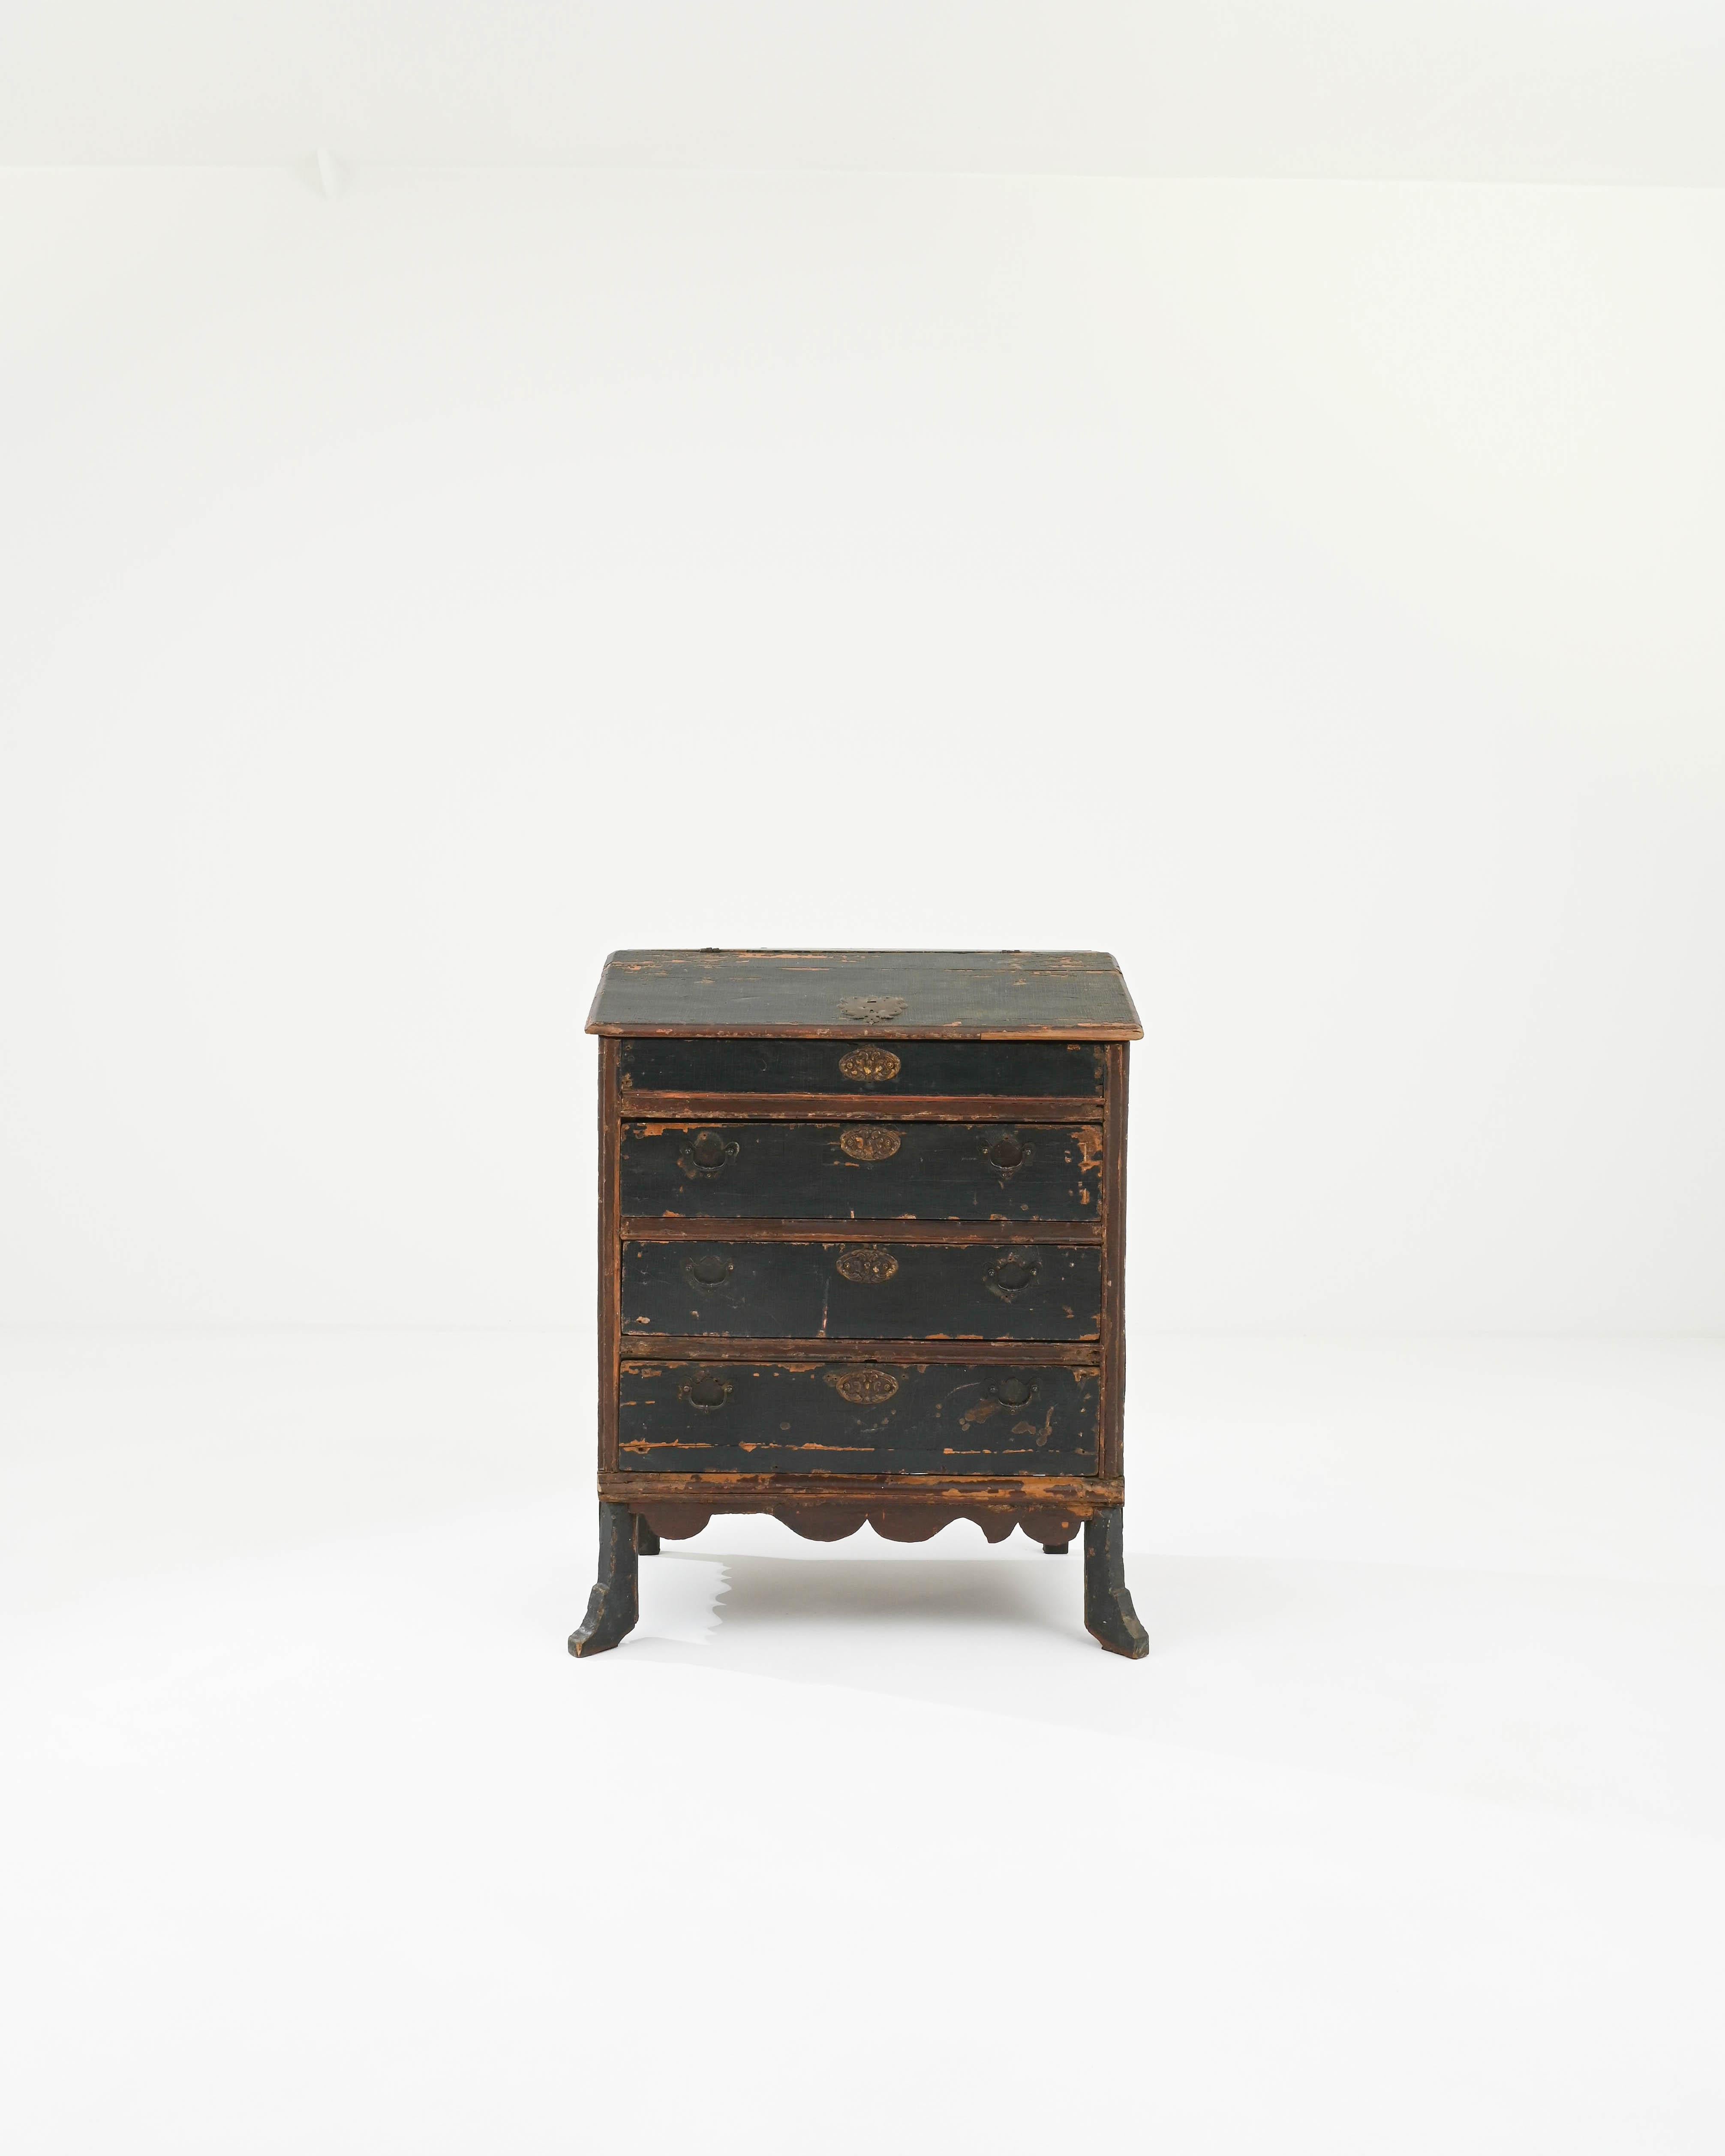 The appealing shape and unique patina of this antique wooden chest of drawers make it a covetable find. Built in Portugal in the 1800s, the gentle tilt of the upper surface suggests that this piece was once used as a writing desk; the lid of the